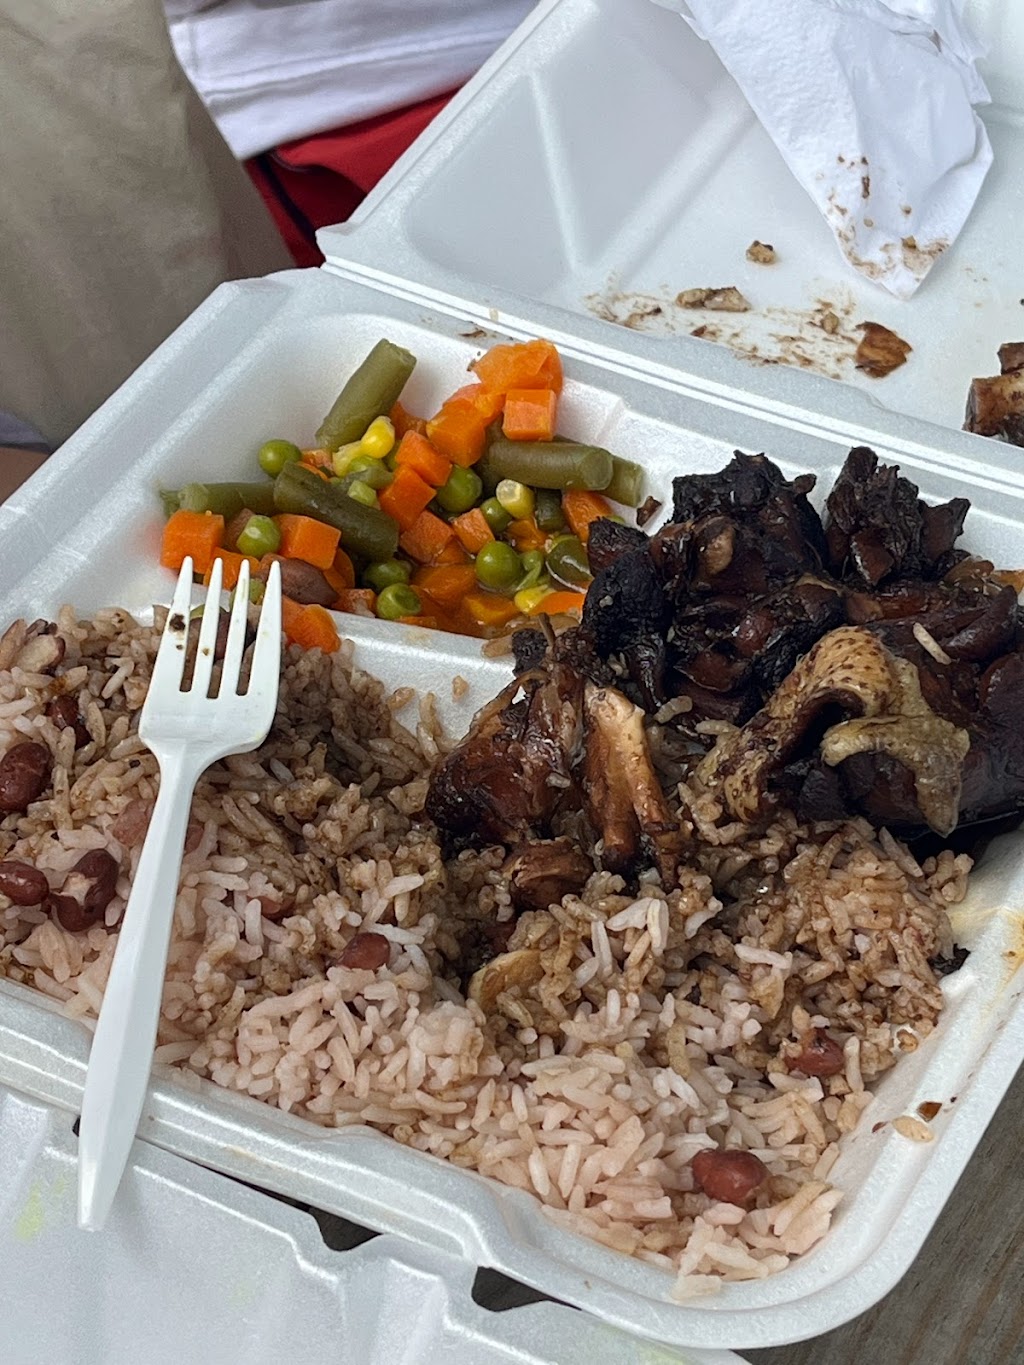 Yaadie Authentic Jamaican Cuisine | 540 PA-196, Coolbaugh Township, PA 18466 | Phone: (570) 245-1281